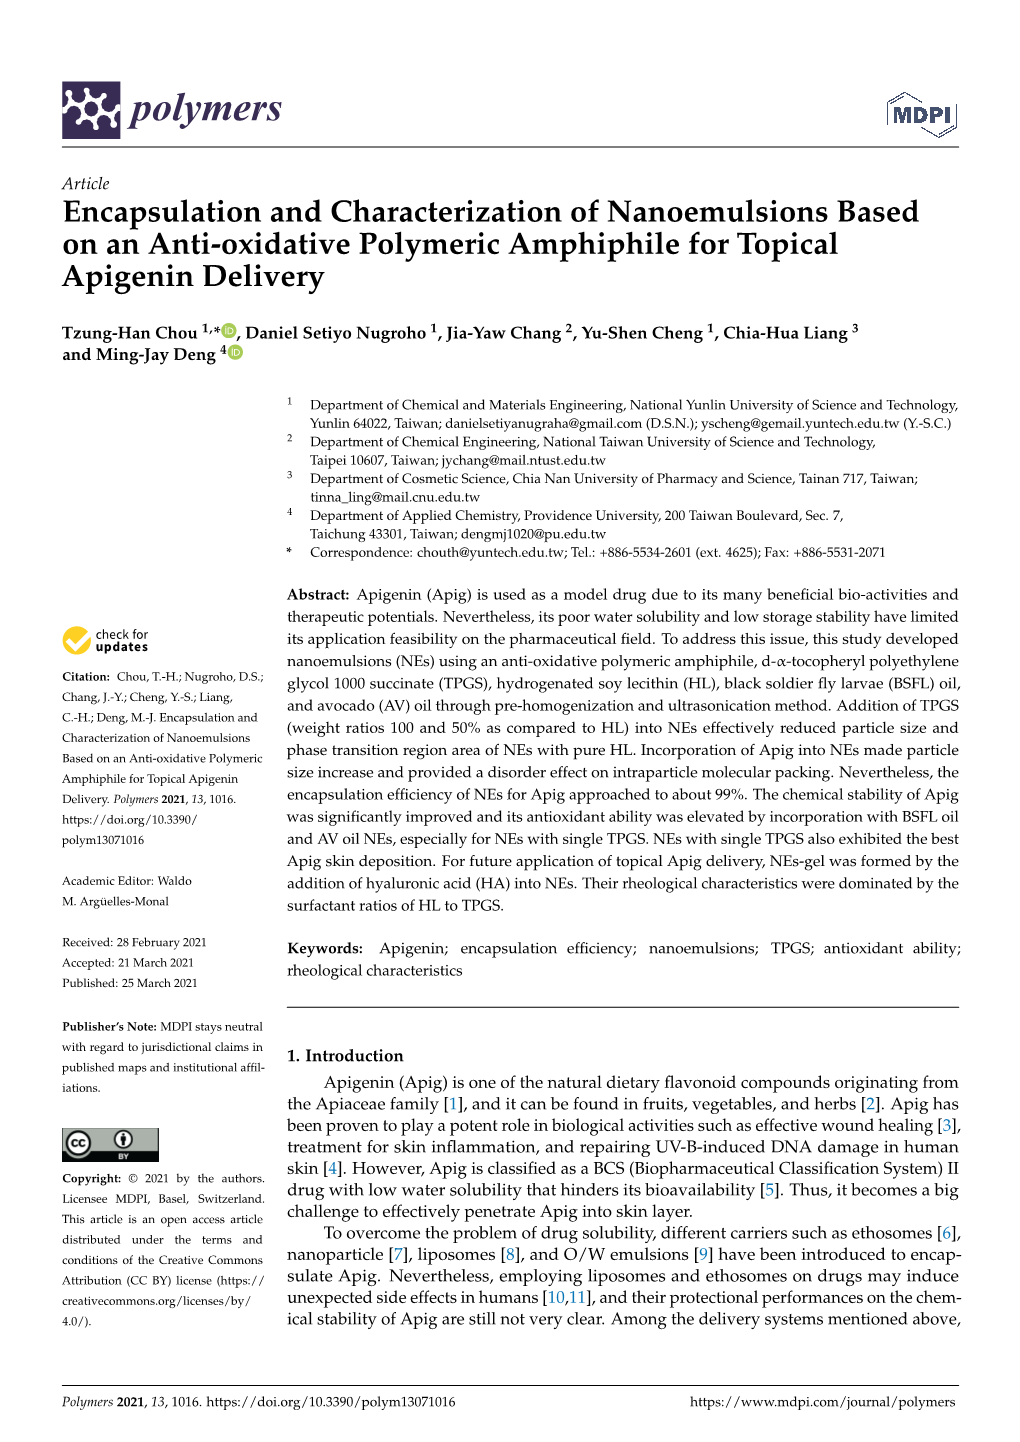 Encapsulation and Characterization of Nanoemulsions Based on an Anti-Oxidative Polymeric Amphiphile for Topical Apigenin Delivery